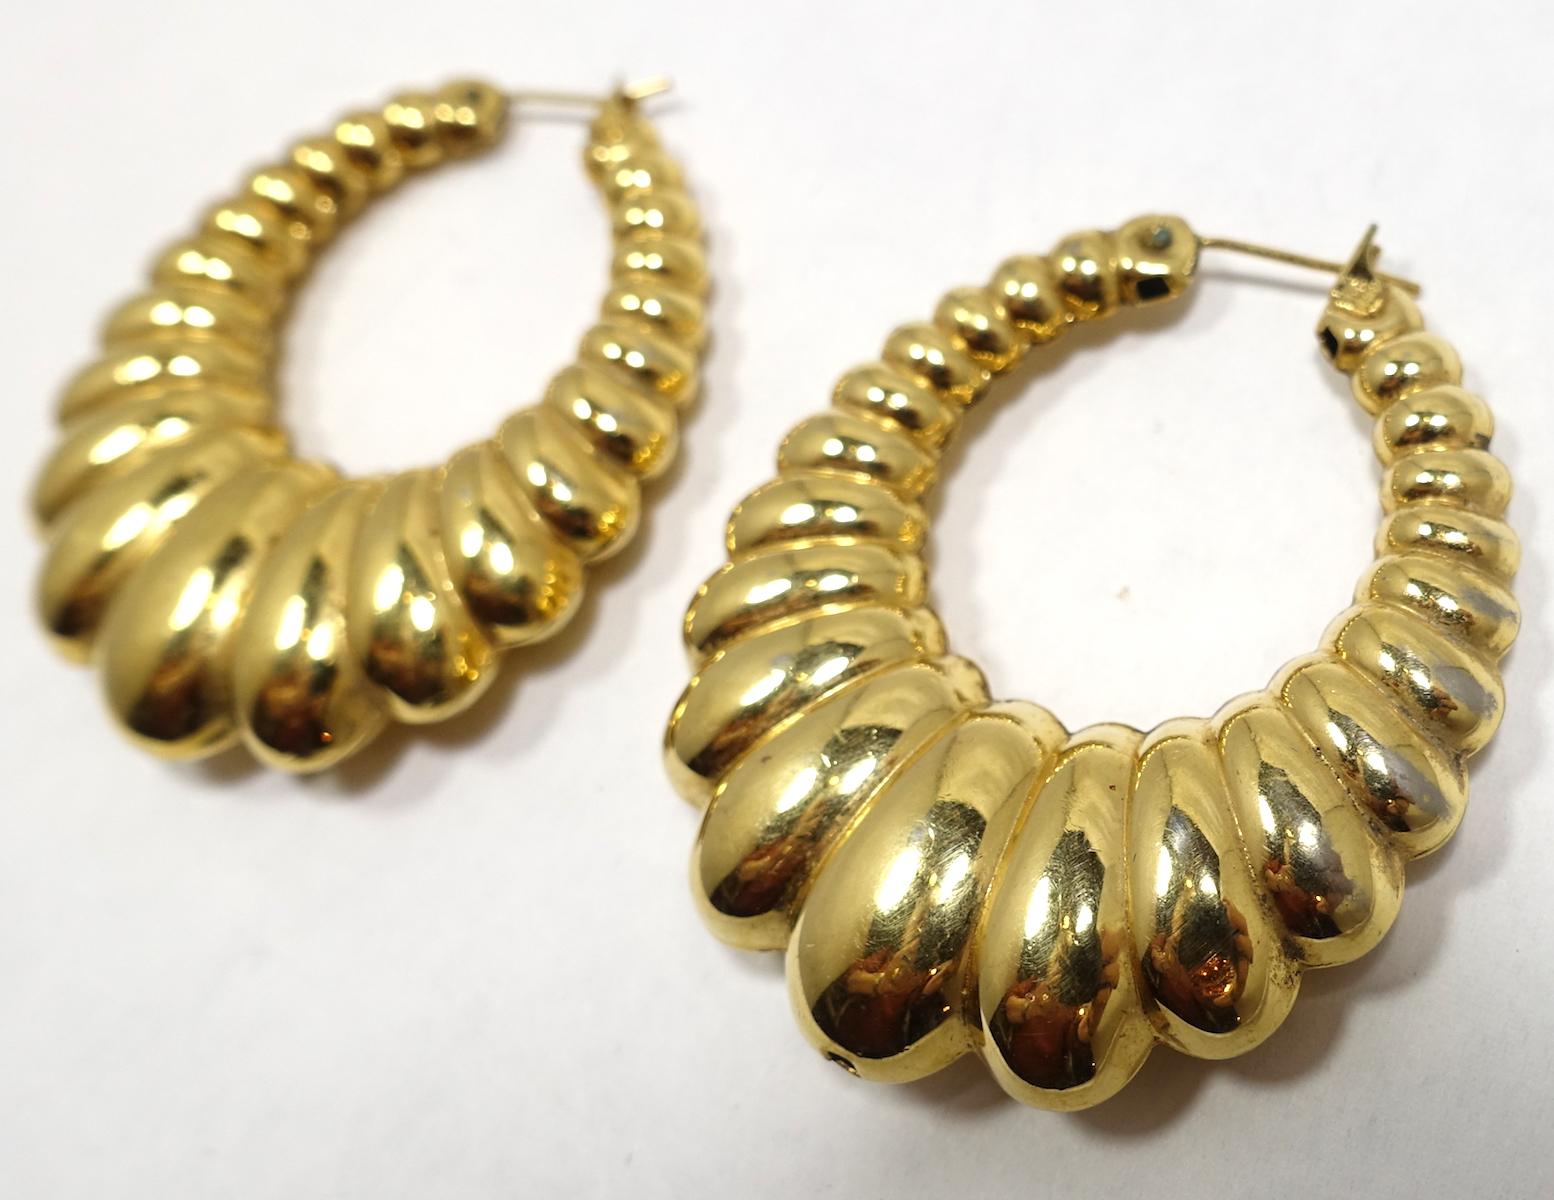 These vintage Monet hoop earrings have a detailed shrimp ribbed design in a gold tone metal setting. These pierced earrings measure 2” x 1-5/8” and are signed “Monet”.  They are in excellent condition.